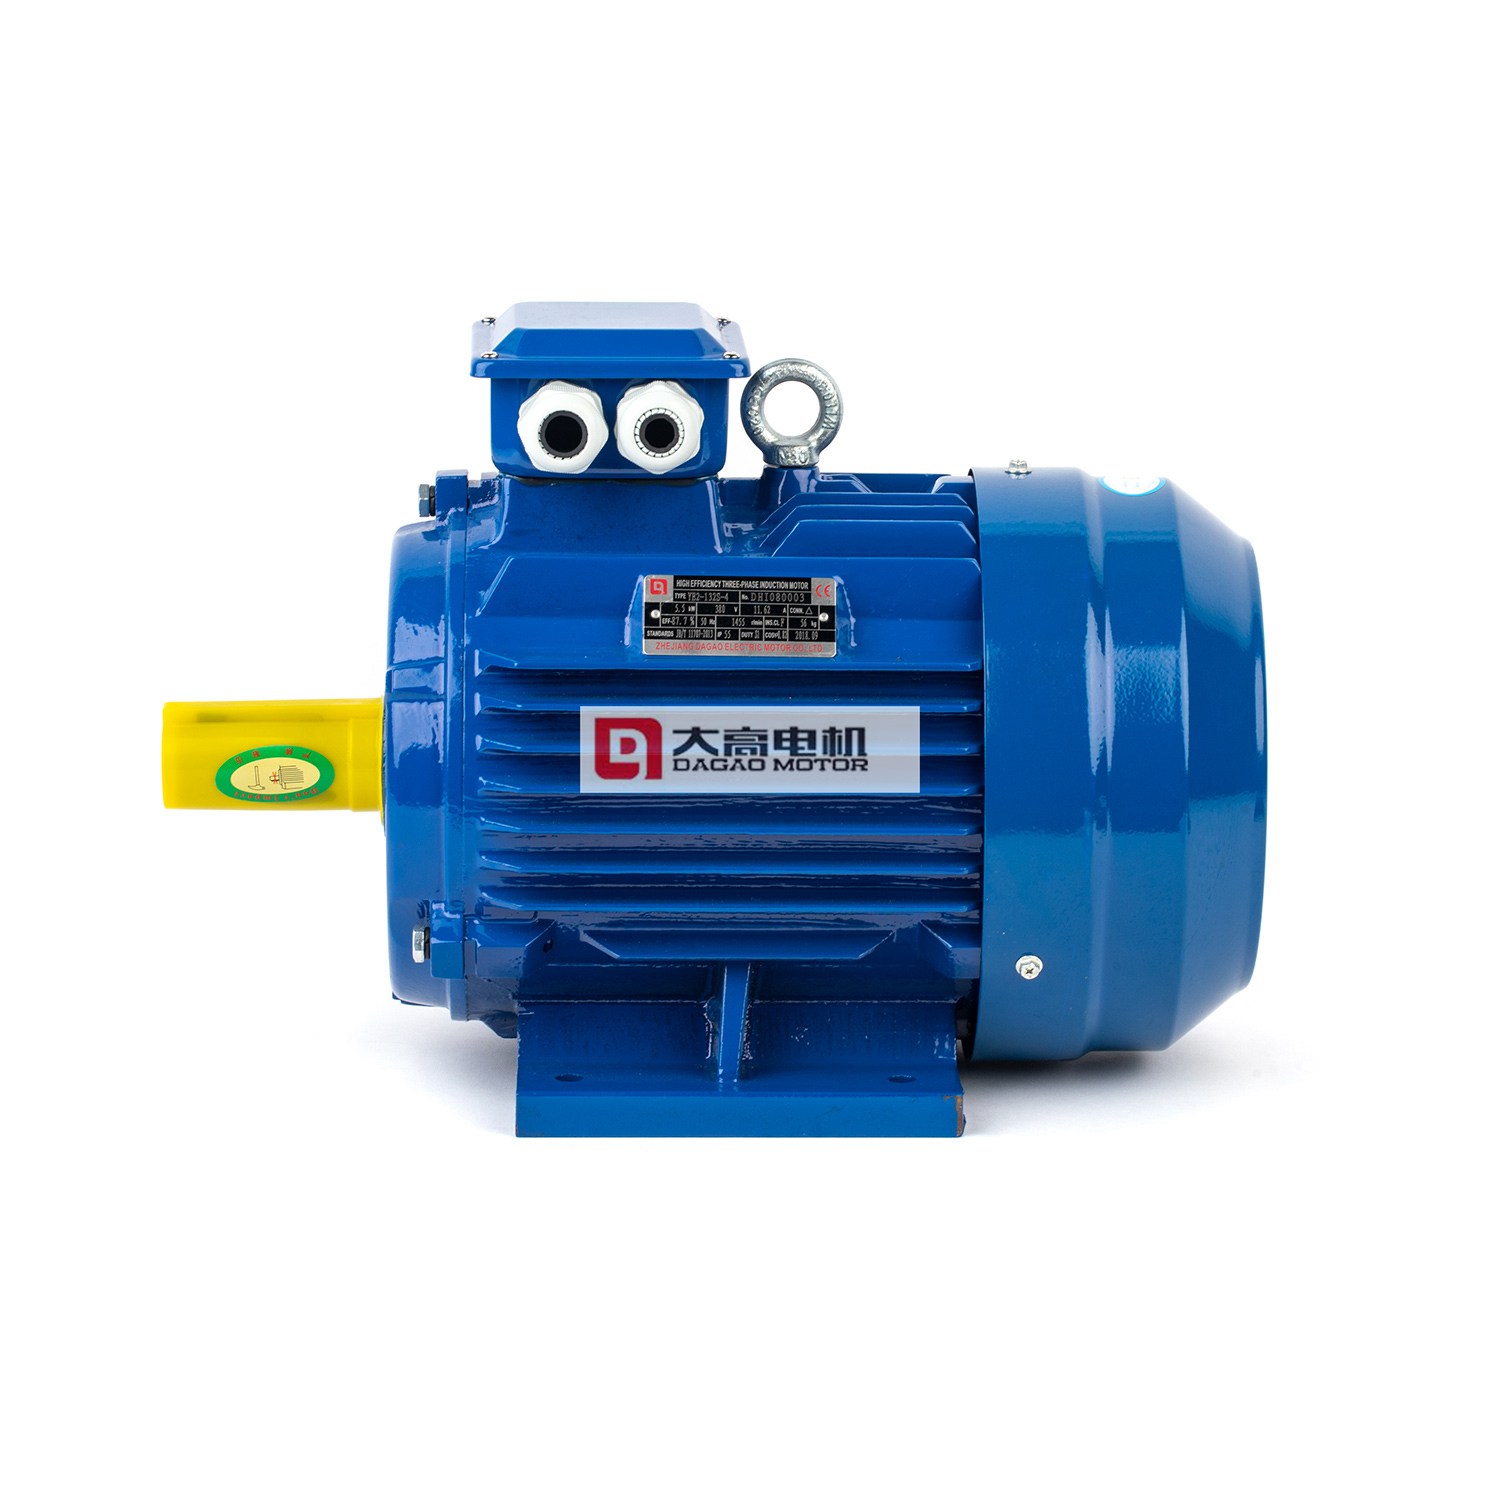 New Delivery for 3 Phase Induction Motor Water Pump - 4hp/3kw YE3 Series Three Phase Asynchronous Motor(YE3-100L-2)3000r/min – Dagao